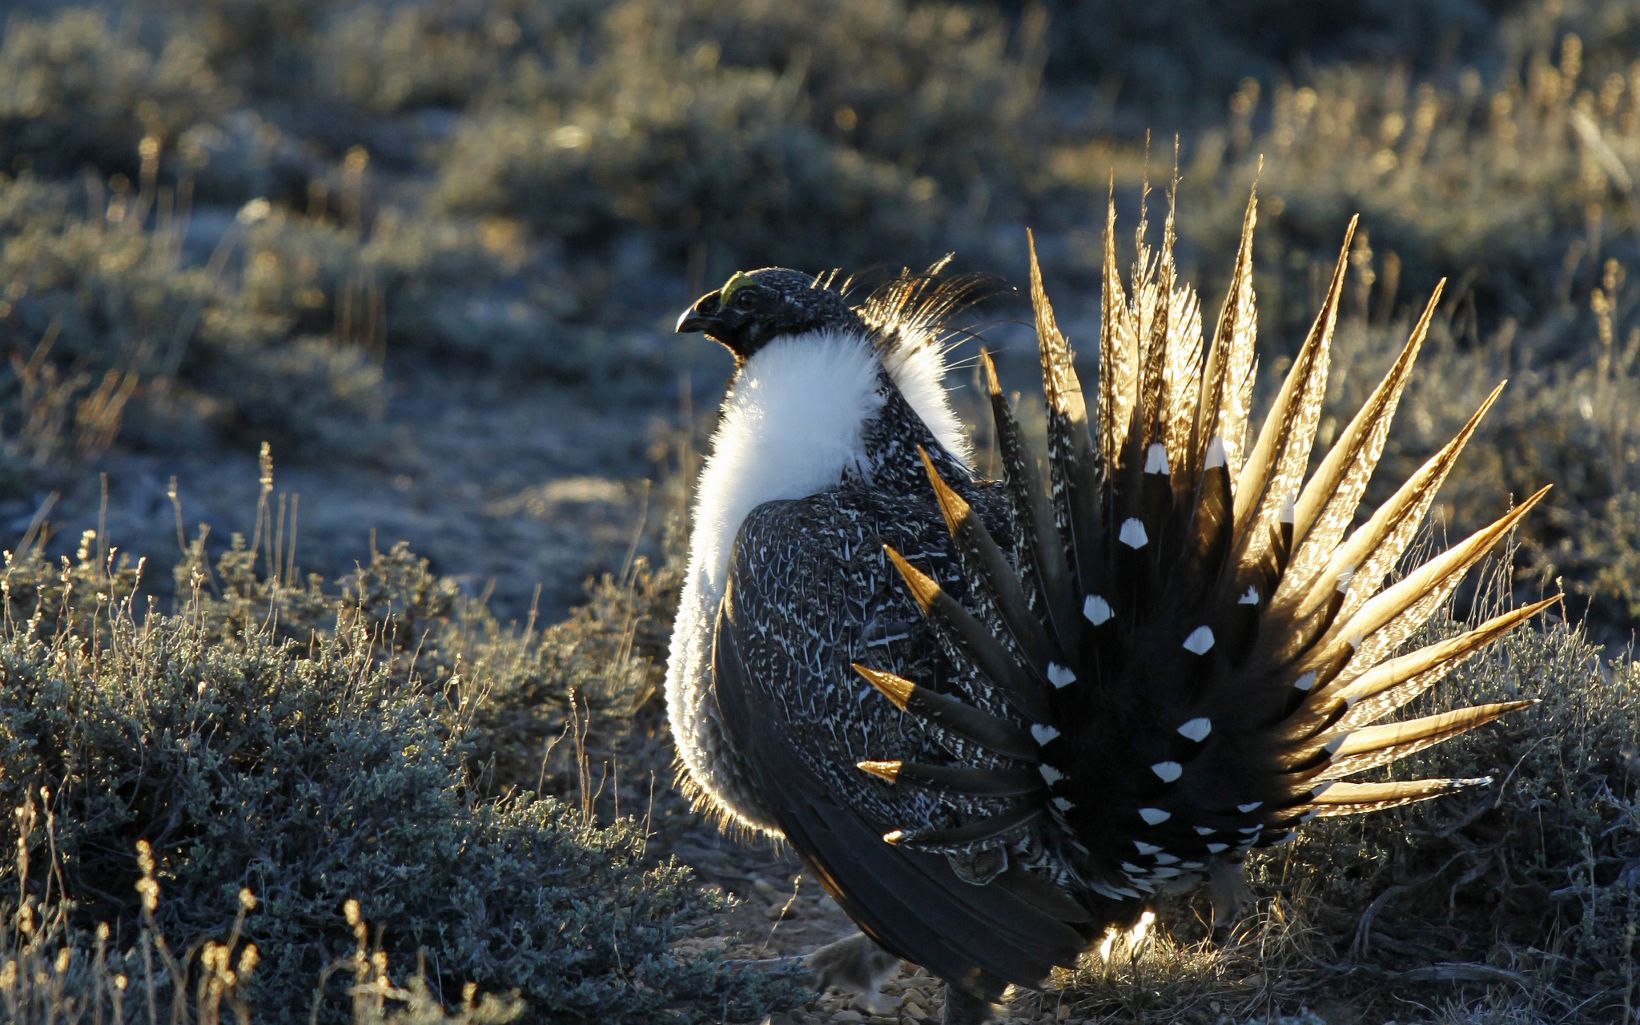 A Greater Sage-Grouse (Centrocercus urophasianus) in Wyoming.